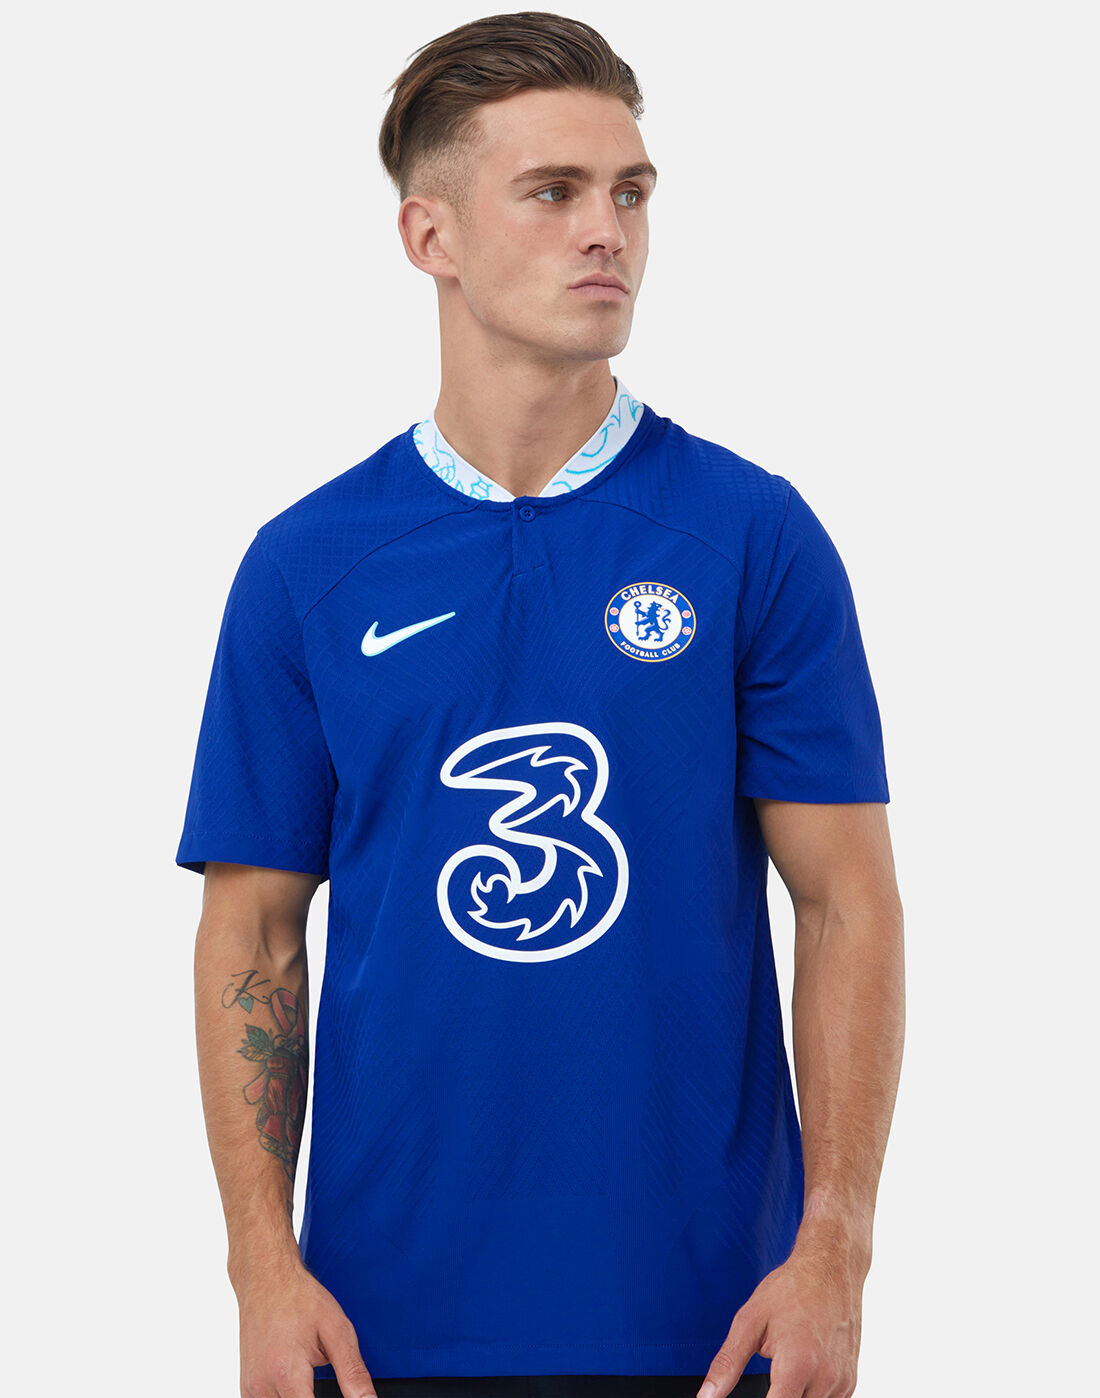 what is the symbol on chelsea jersey